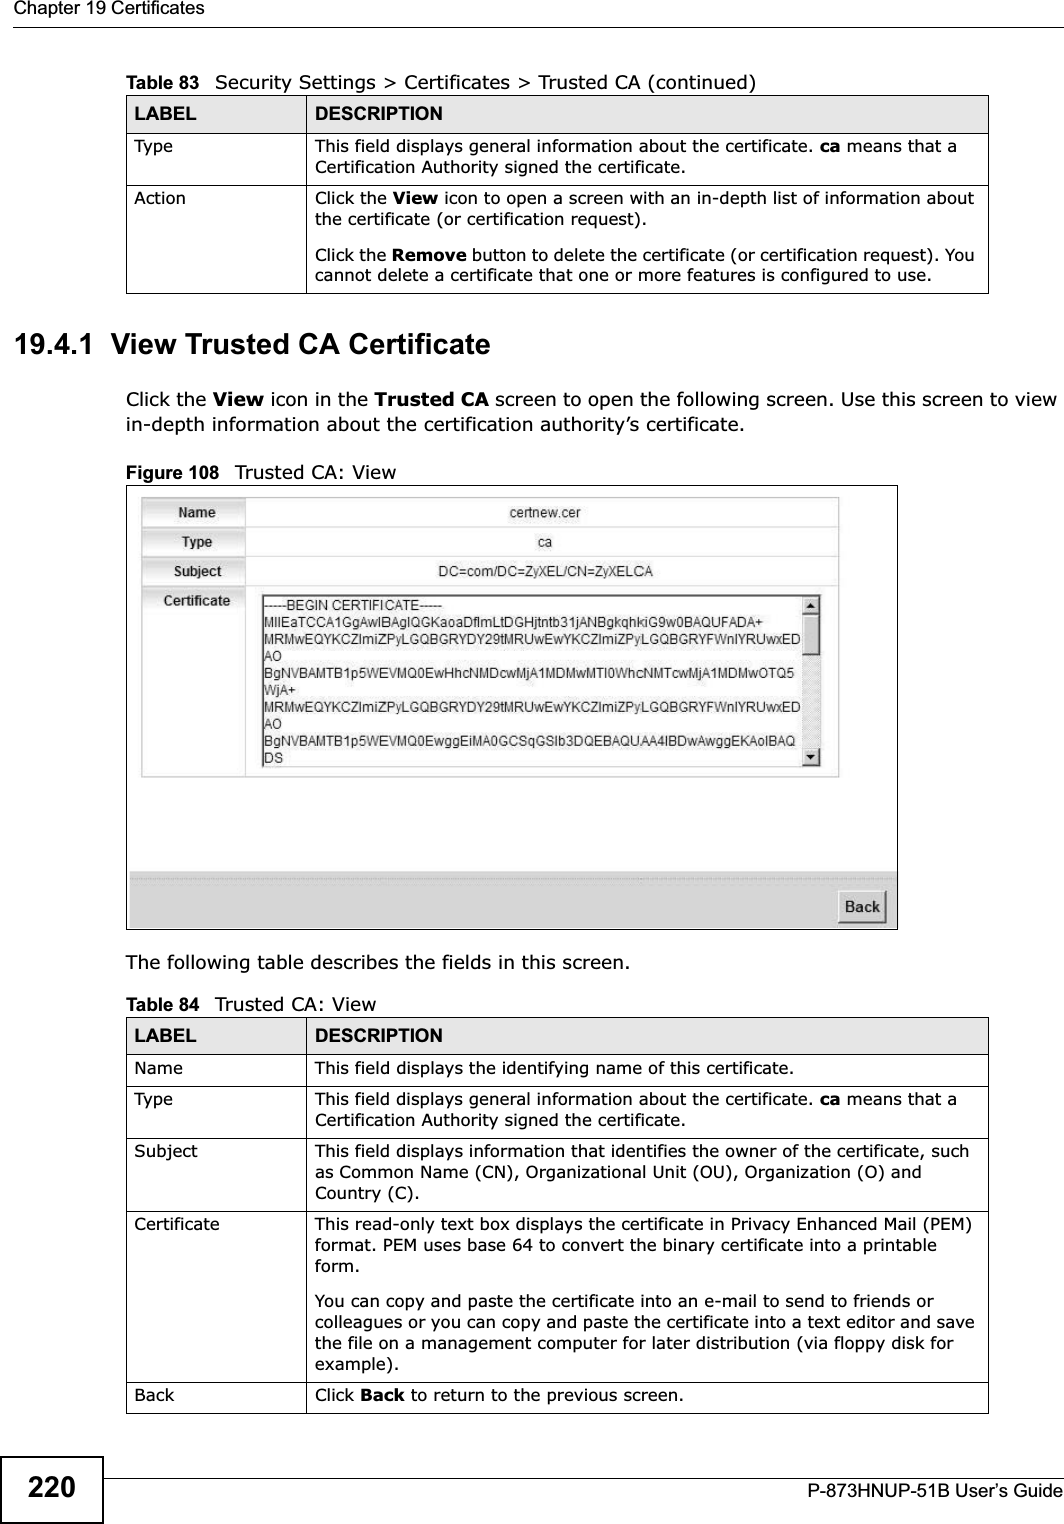 Chapter 19 CertificatesP-873HNUP-51B User’s Guide22019.4.1  View Trusted CA CertificateClick the View icon in the Trusted CA screen to open the following screen. Use this screen to view in-depth information about the certification authority’s certificate.Figure 108   Trusted CA: View The following table describes the fields in this screen. Type This field displays general information about the certificate. ca means that a Certification Authority signed the certificate. Action Click the View icon to open a screen with an in-depth list of information about the certificate (or certification request).Click the Remove button to delete the certificate (or certification request). You cannot delete a certificate that one or more features is configured to use.Table 83   Security Settings &gt; Certificates &gt; Trusted CA (continued)LABEL DESCRIPTIONTable 84   Trusted CA: ViewLABEL DESCRIPTIONName This field displays the identifying name of this certificate. Type This field displays general information about the certificate. ca means that a Certification Authority signed the certificate. Subject This field displays information that identifies the owner of the certificate, such as Common Name (CN), Organizational Unit (OU), Organization (O) and Country (C).Certificate This read-only text box displays the certificate in Privacy Enhanced Mail (PEM) format. PEM uses base 64 to convert the binary certificate into a printable form.You can copy and paste the certificate into an e-mail to send to friends or colleagues or you can copy and paste the certificate into a text editor and save the file on a management computer for later distribution (via floppy disk for example).Back Click Back to return to the previous screen.